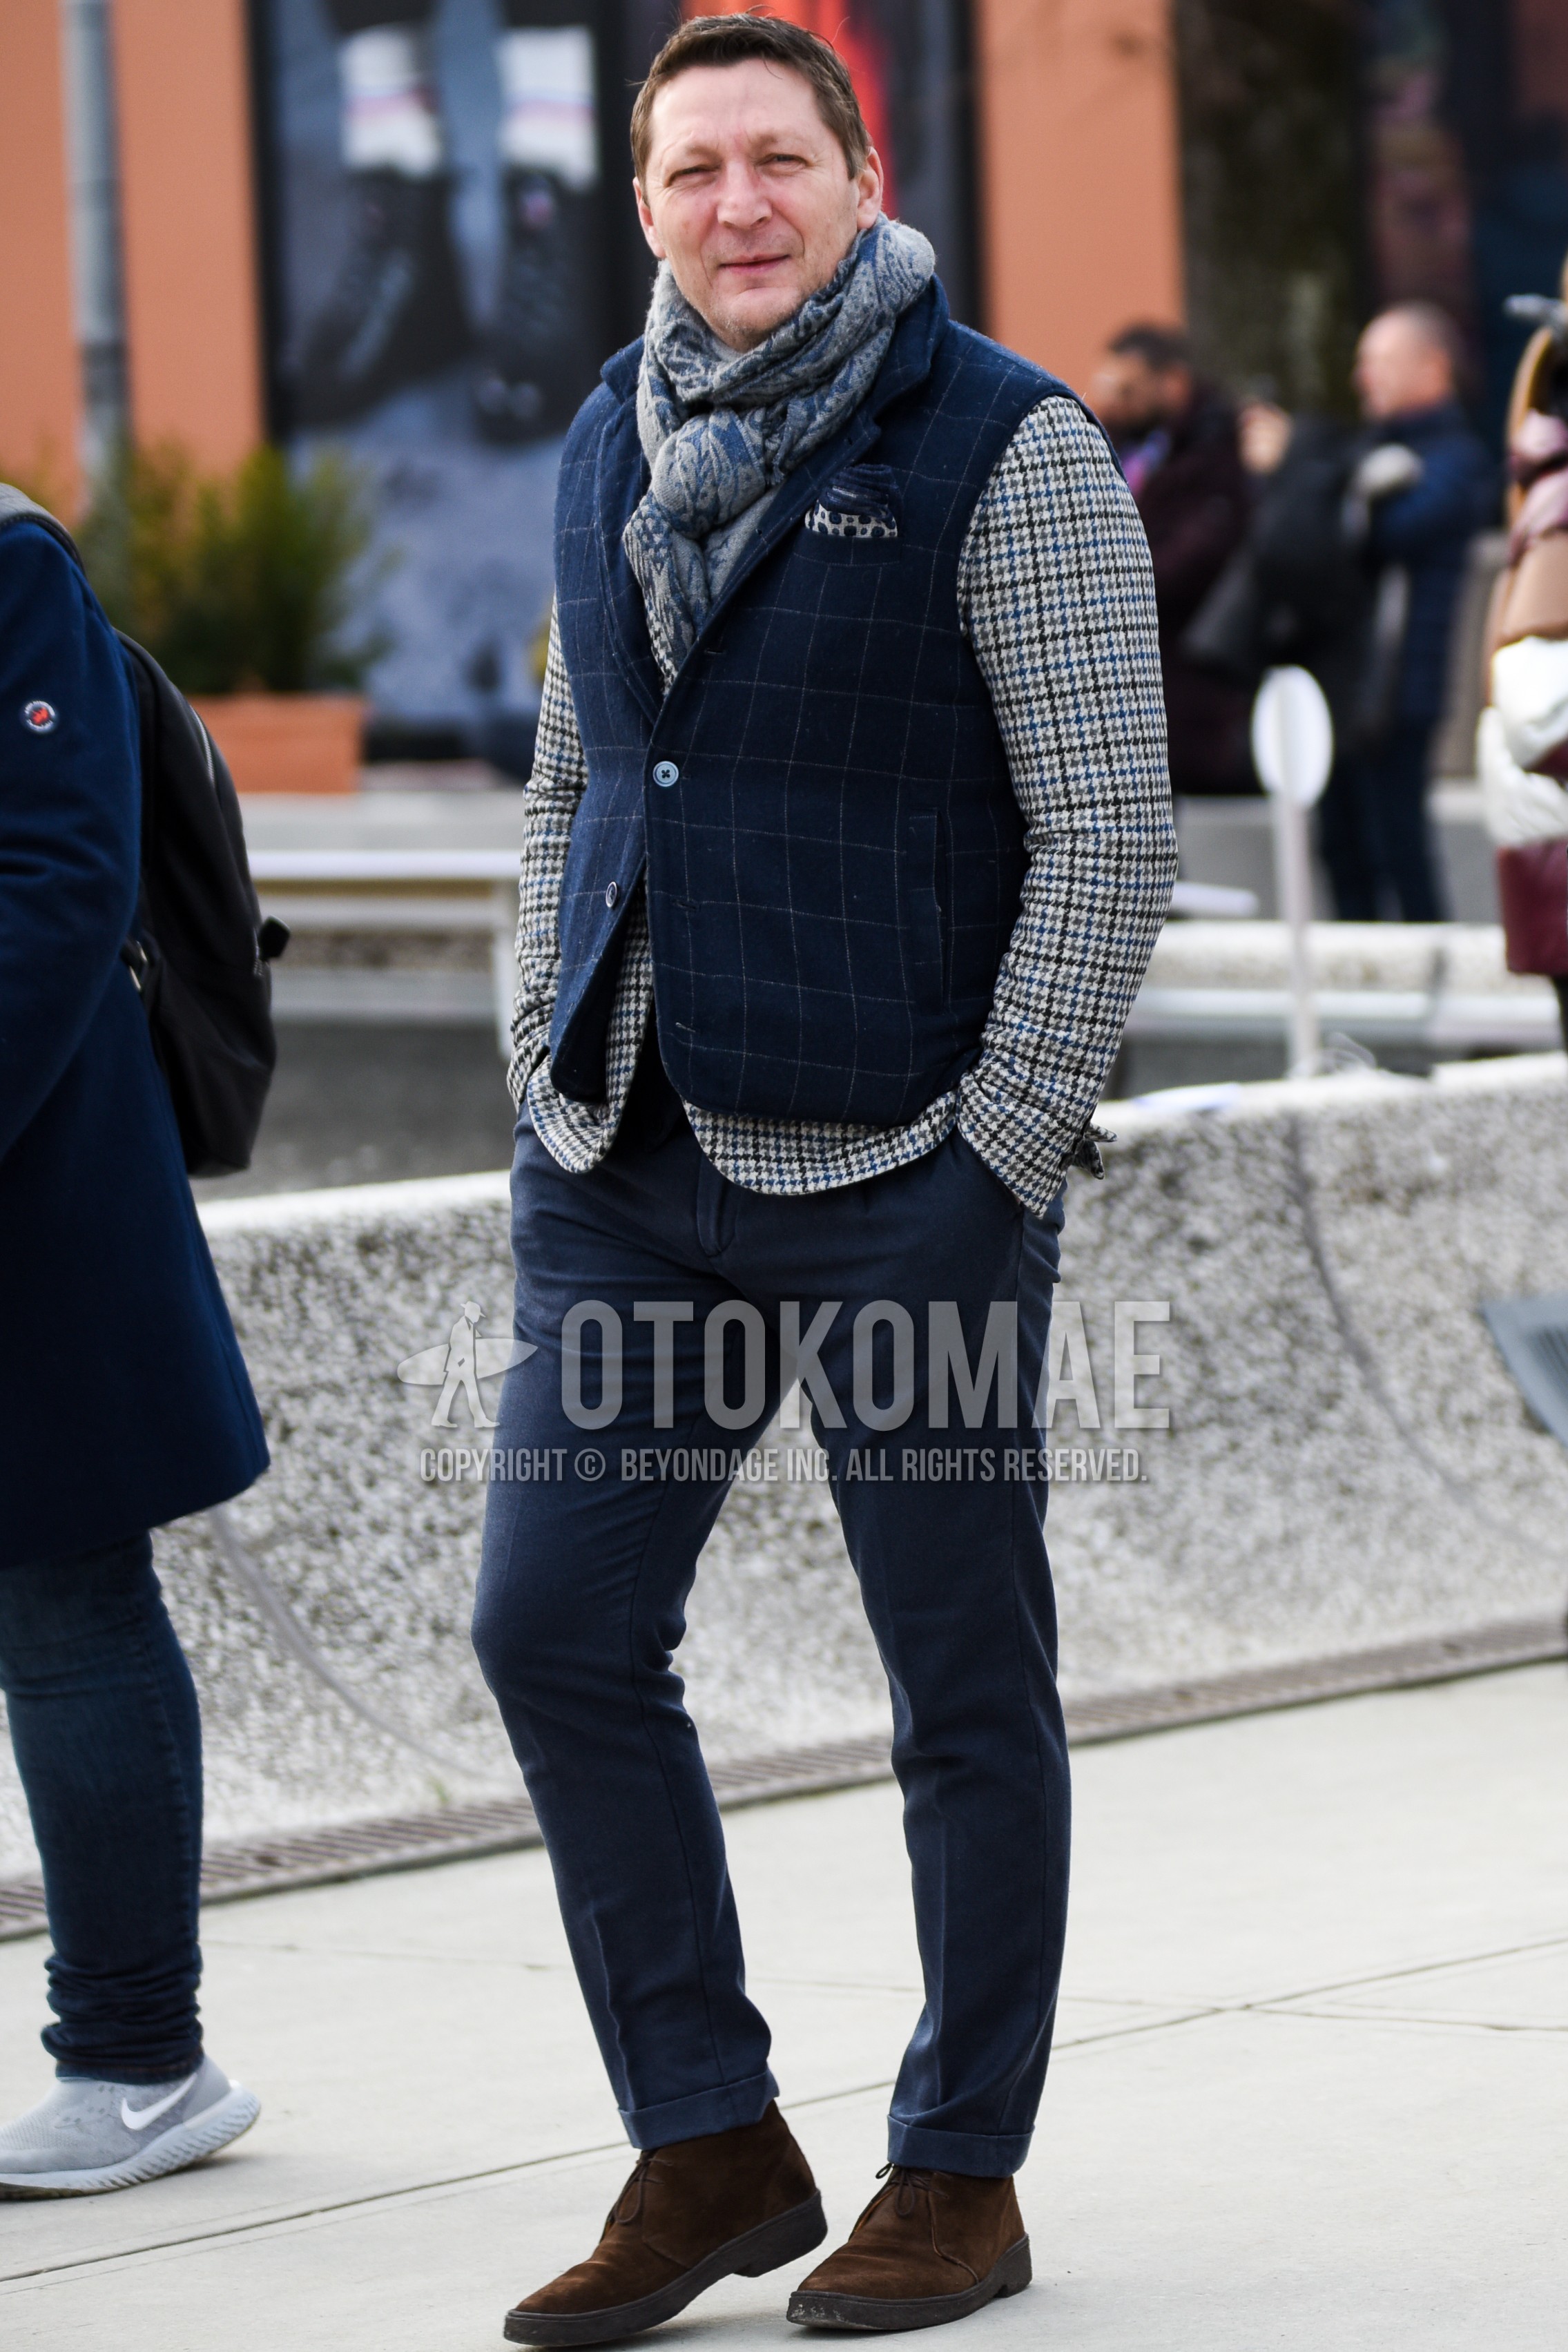 Men's autumn winter outfit with gray scarf scarf, navy check casual vest, gray check tailored jacket, navy plain chinos, brown chukka boots.